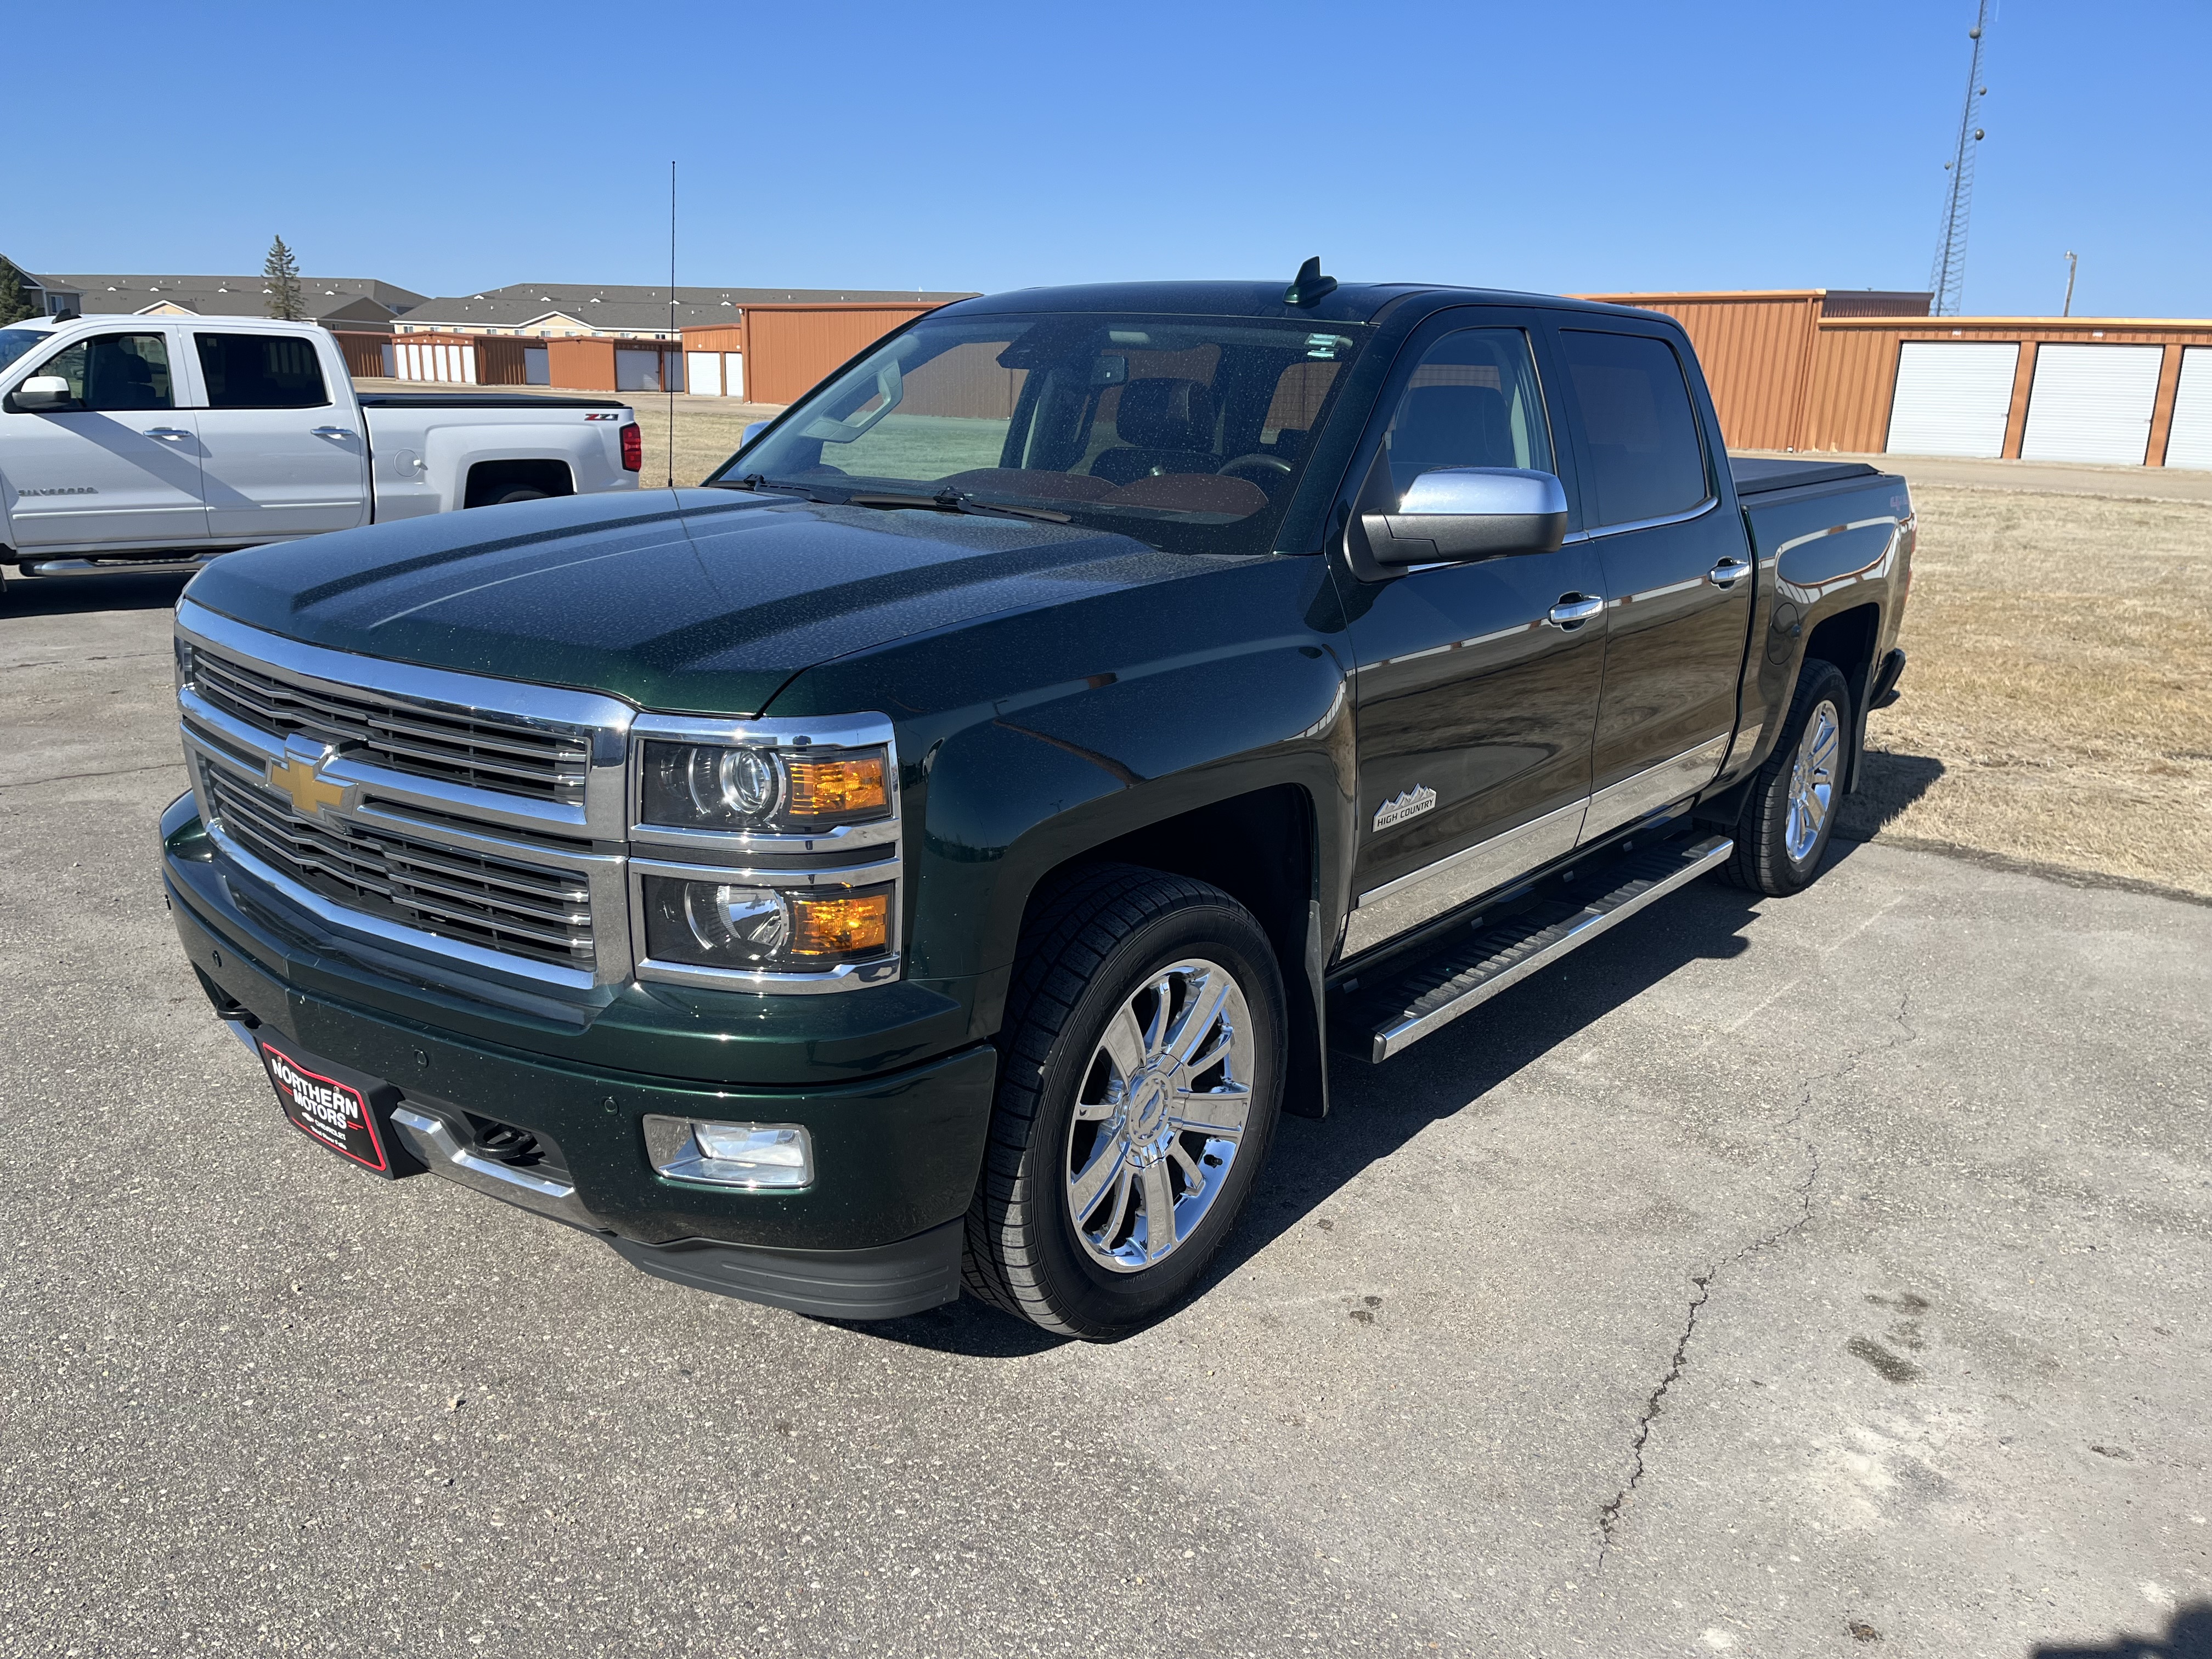 Used 2015 Chevrolet Silverado 1500 High Country with VIN 3GCUKTEC3FG406729 for sale in Thief River Falls, Minnesota